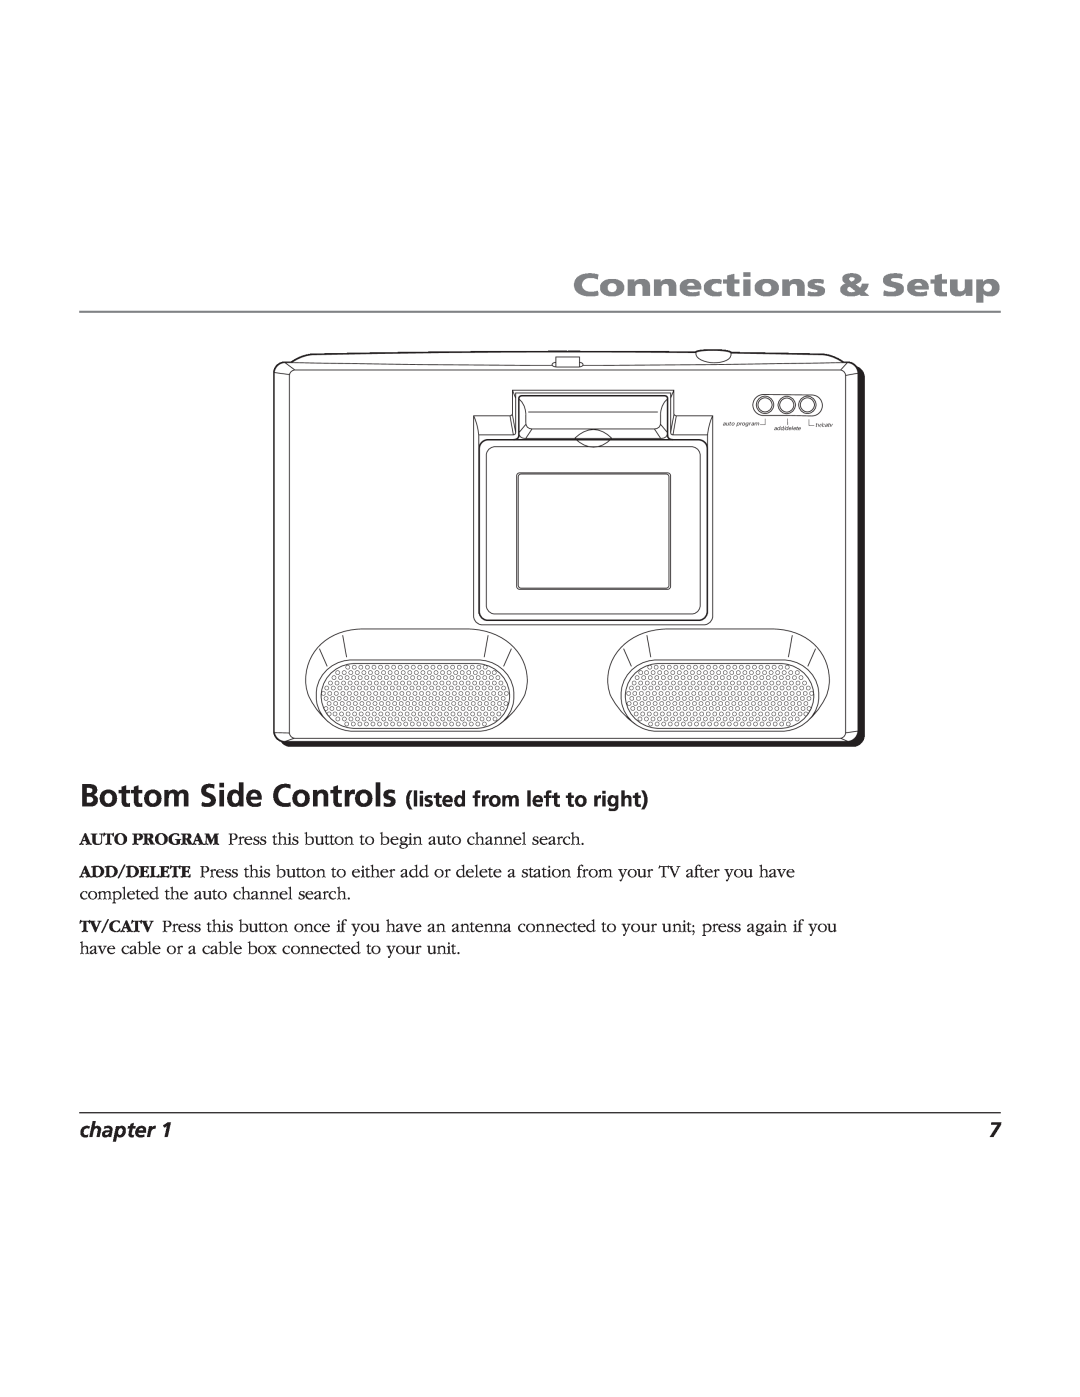 RCA TV/Radio/CD Player user manual Bottom Side Controls listed from left to right, Connections & Setup, chapter 